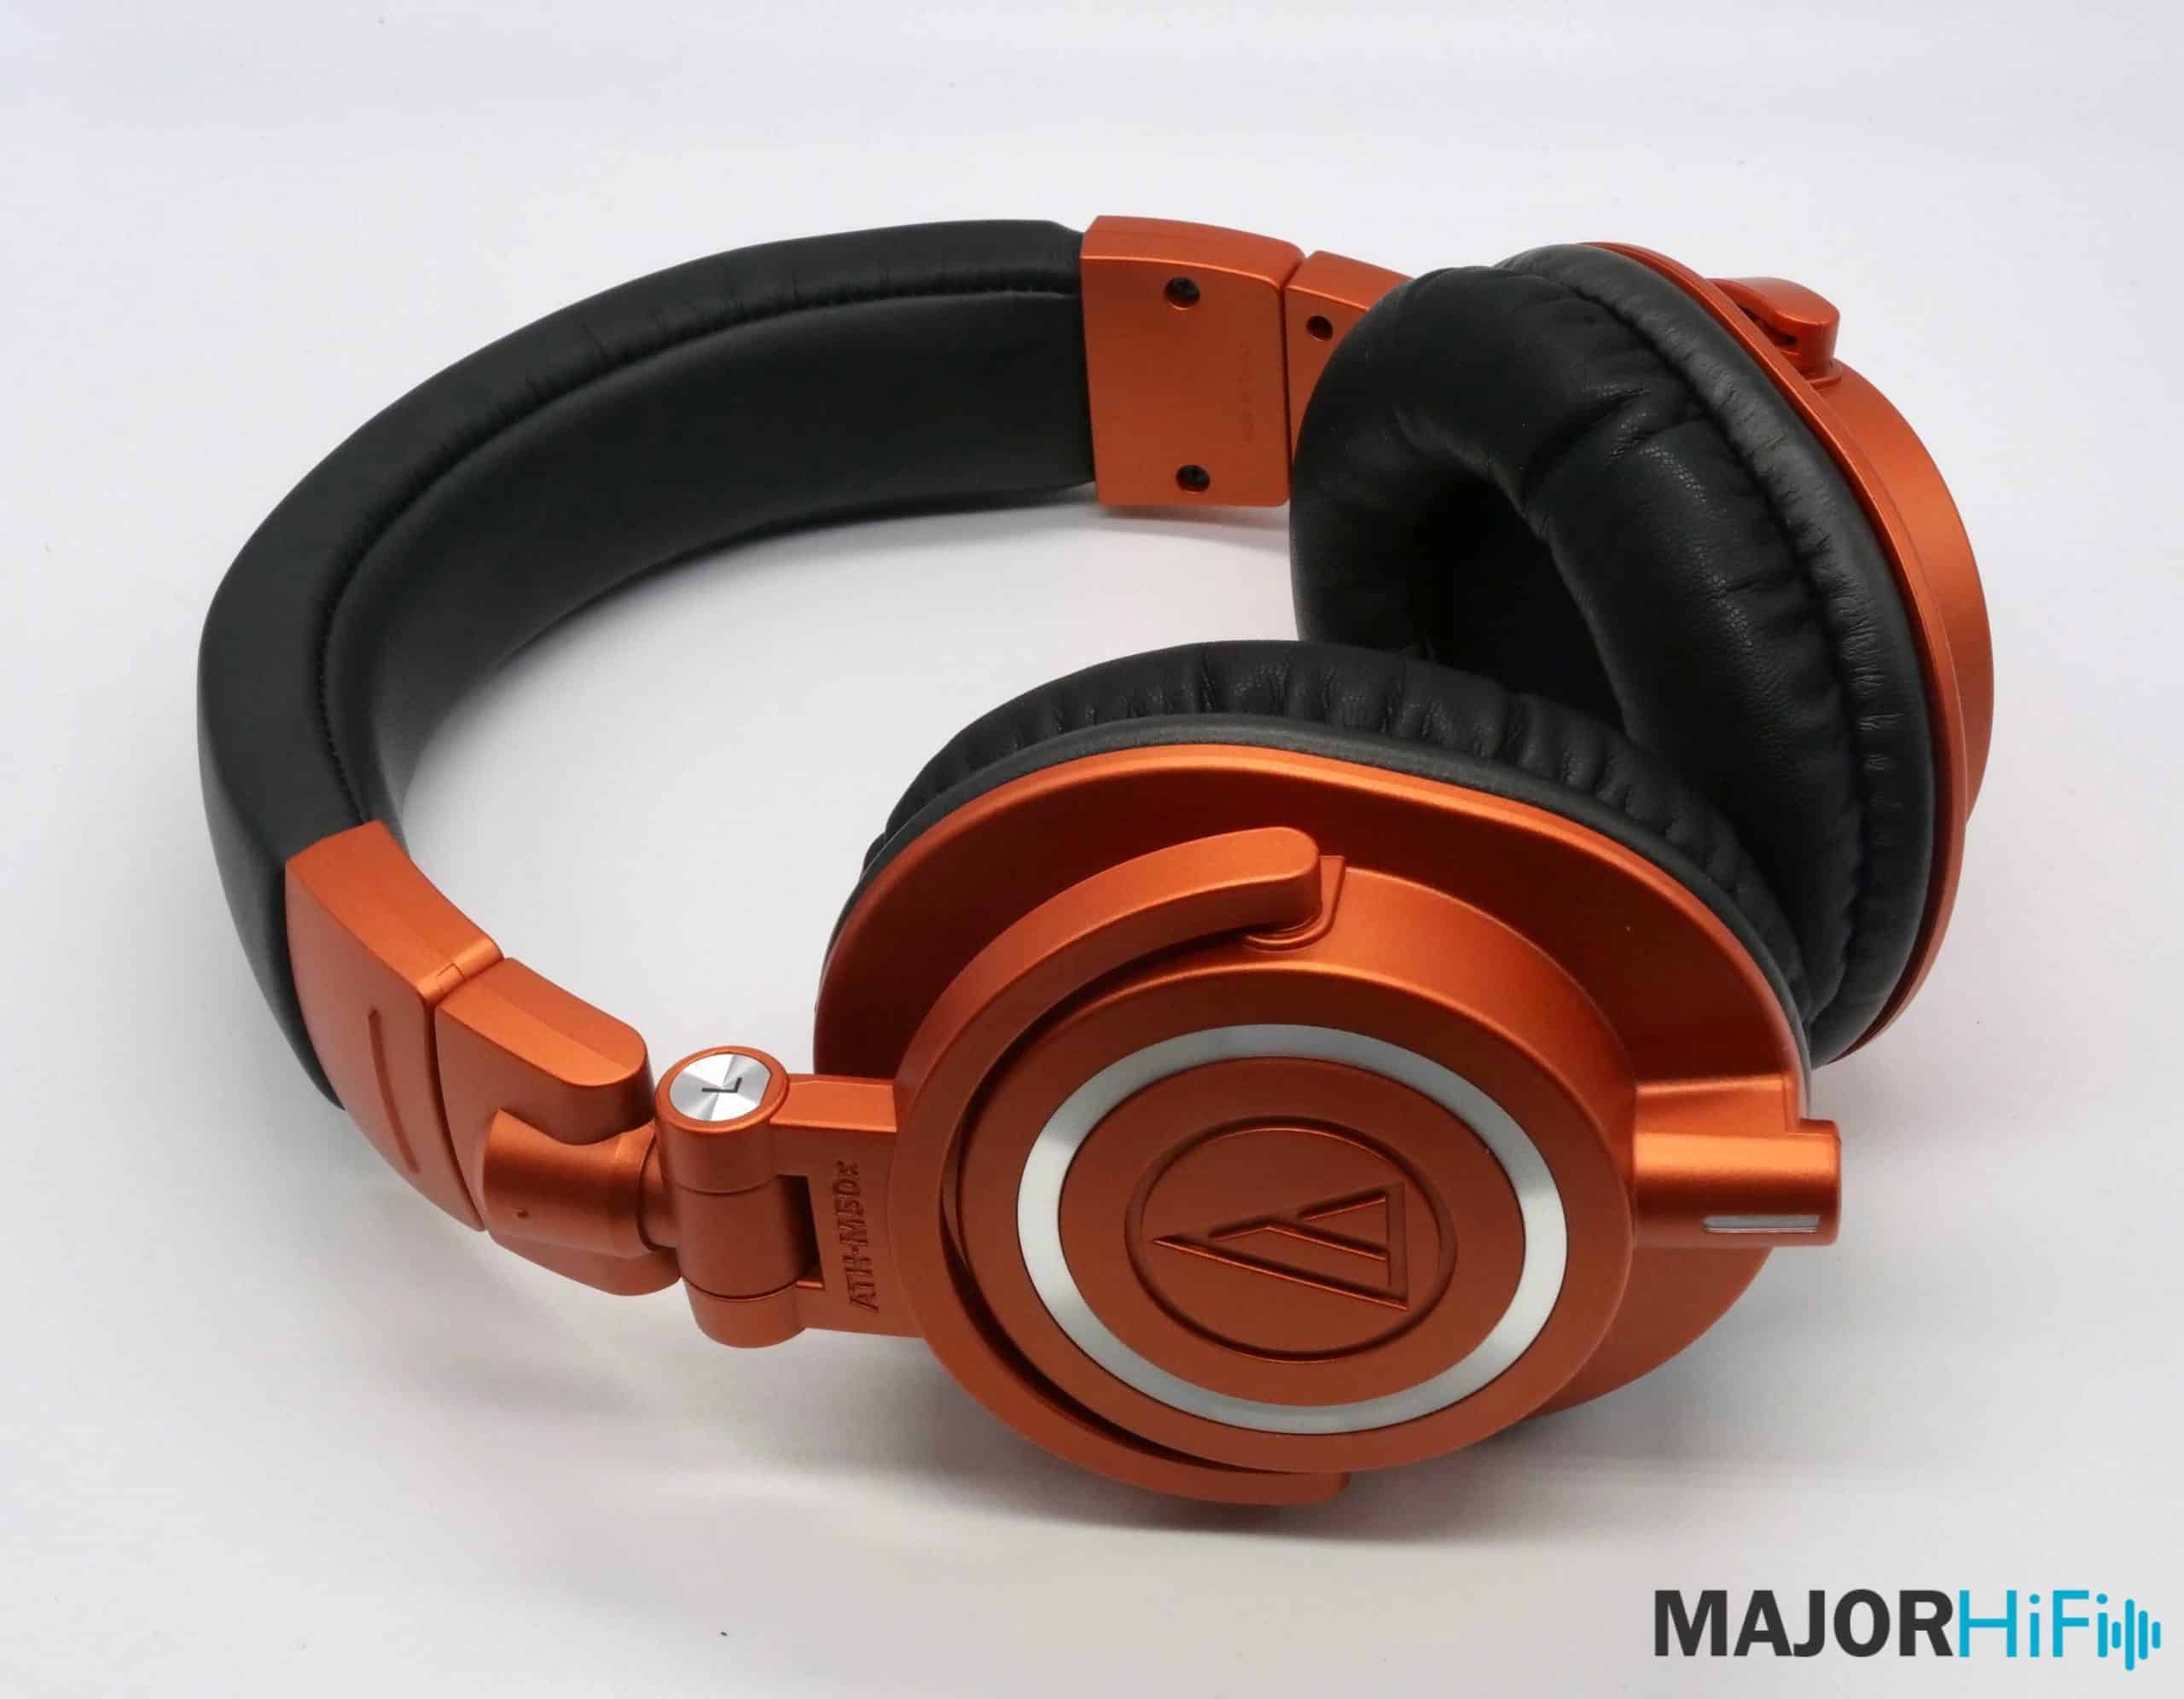 Revisiting a Classic: Audio-Technica ATH-M50x Review